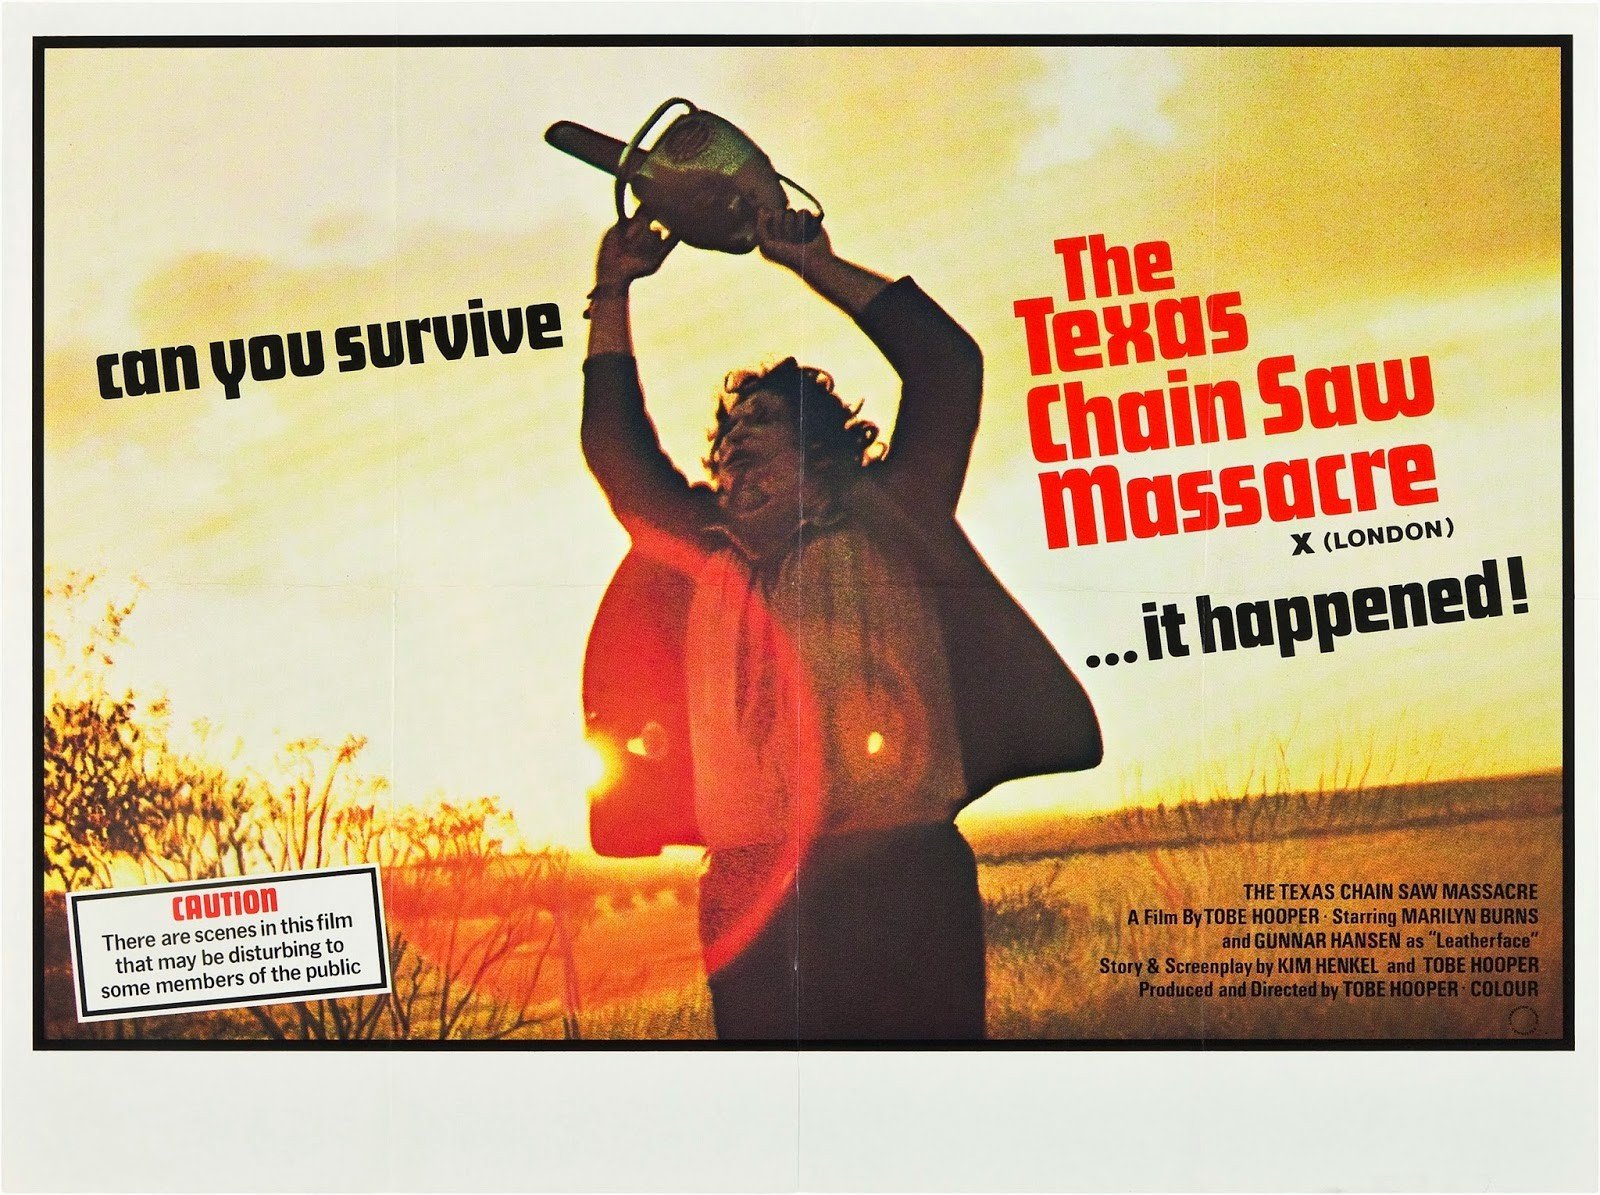 The Texas Chain Saw Massacre, Tobe Hooper, Film posters HD Wallpapers